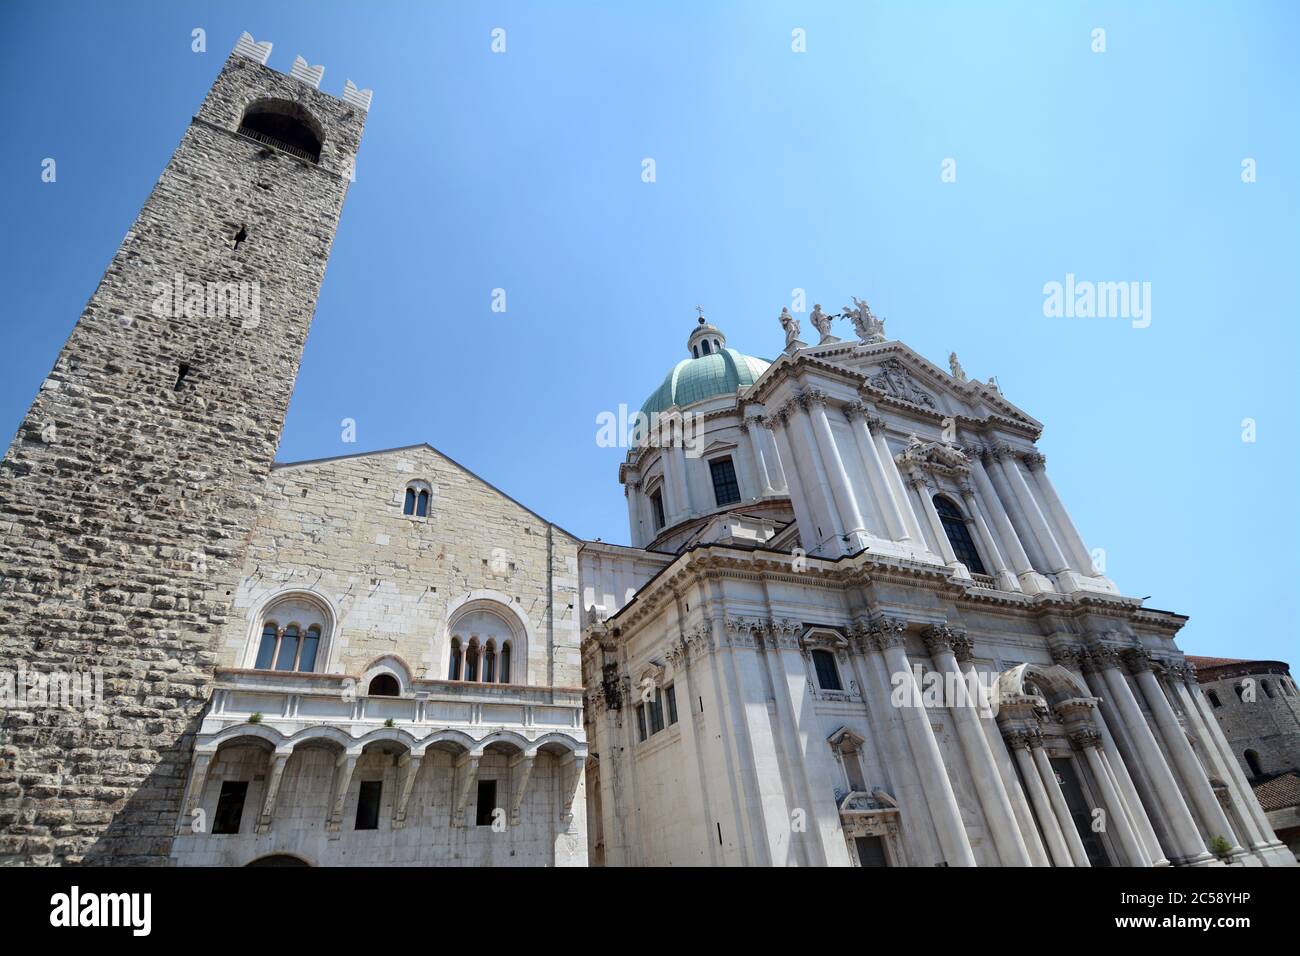 Brescia is a beautiful Lombard city where the cathedral is the Cathedral of Santa Maria Assunta on Paolo VI pope square near  the Broletto palace. Stock Photo